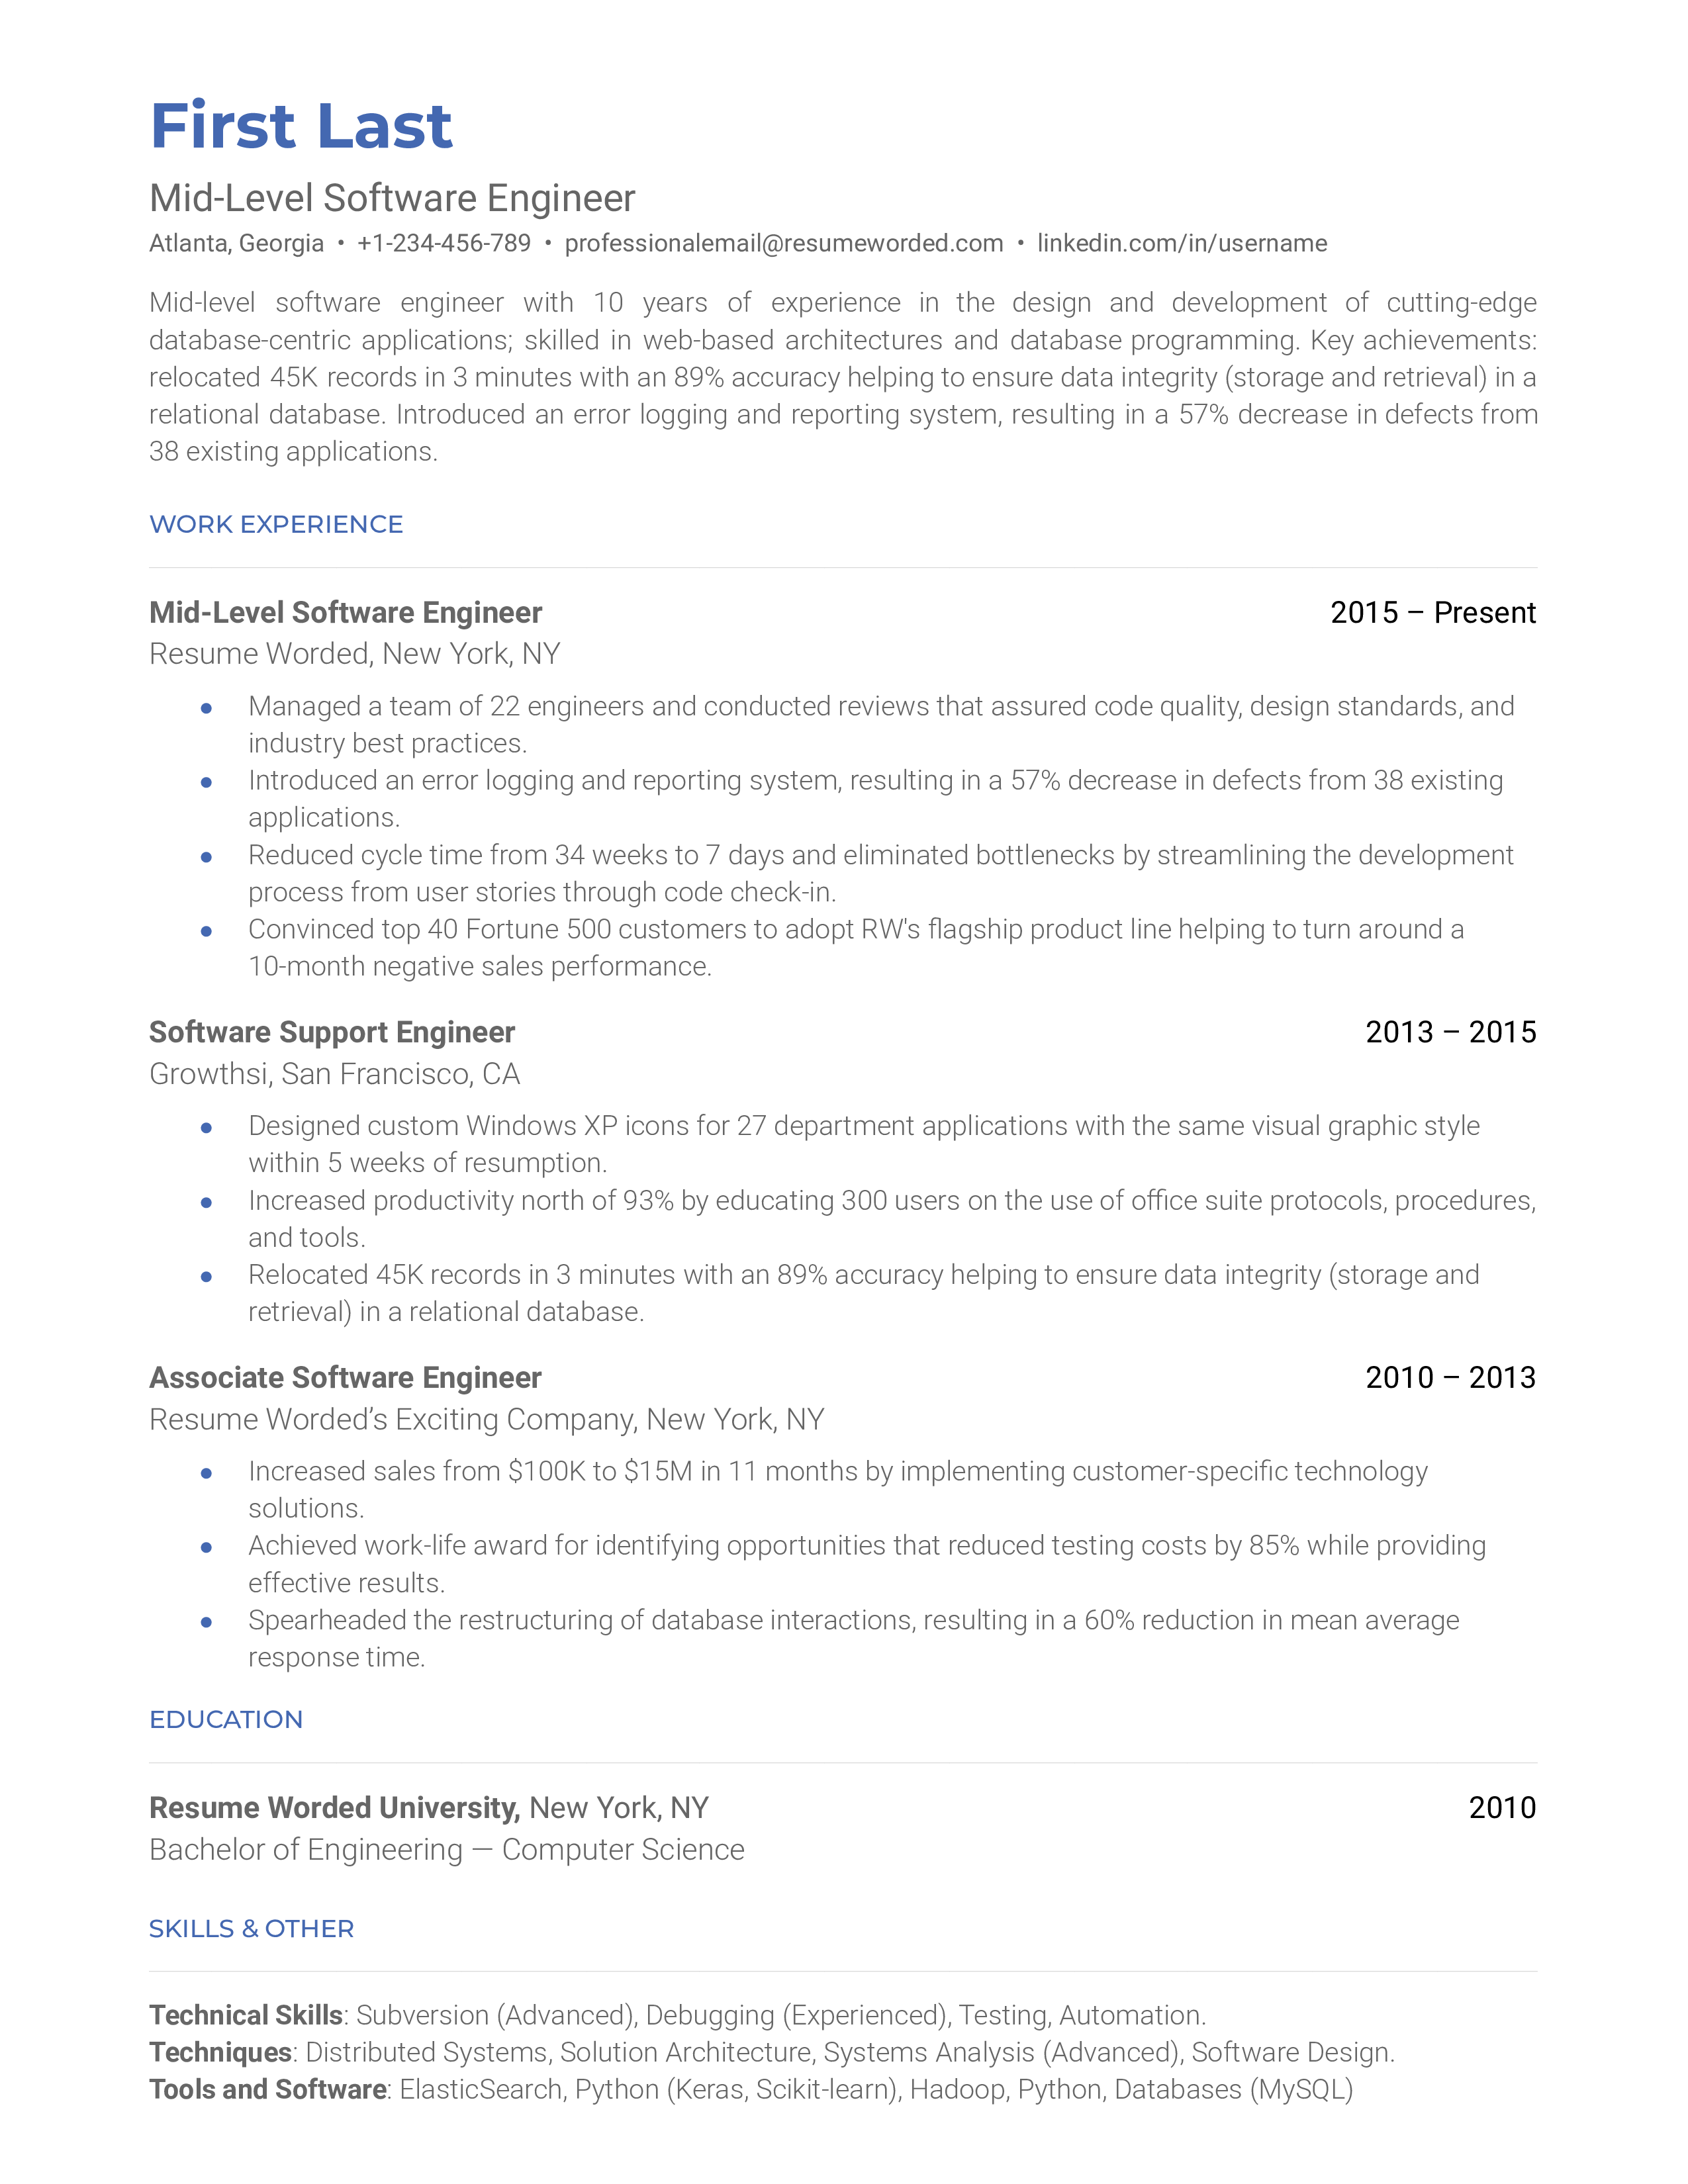 A mid-level software engineer resume sample that highlights the applicant’s value addition and education.